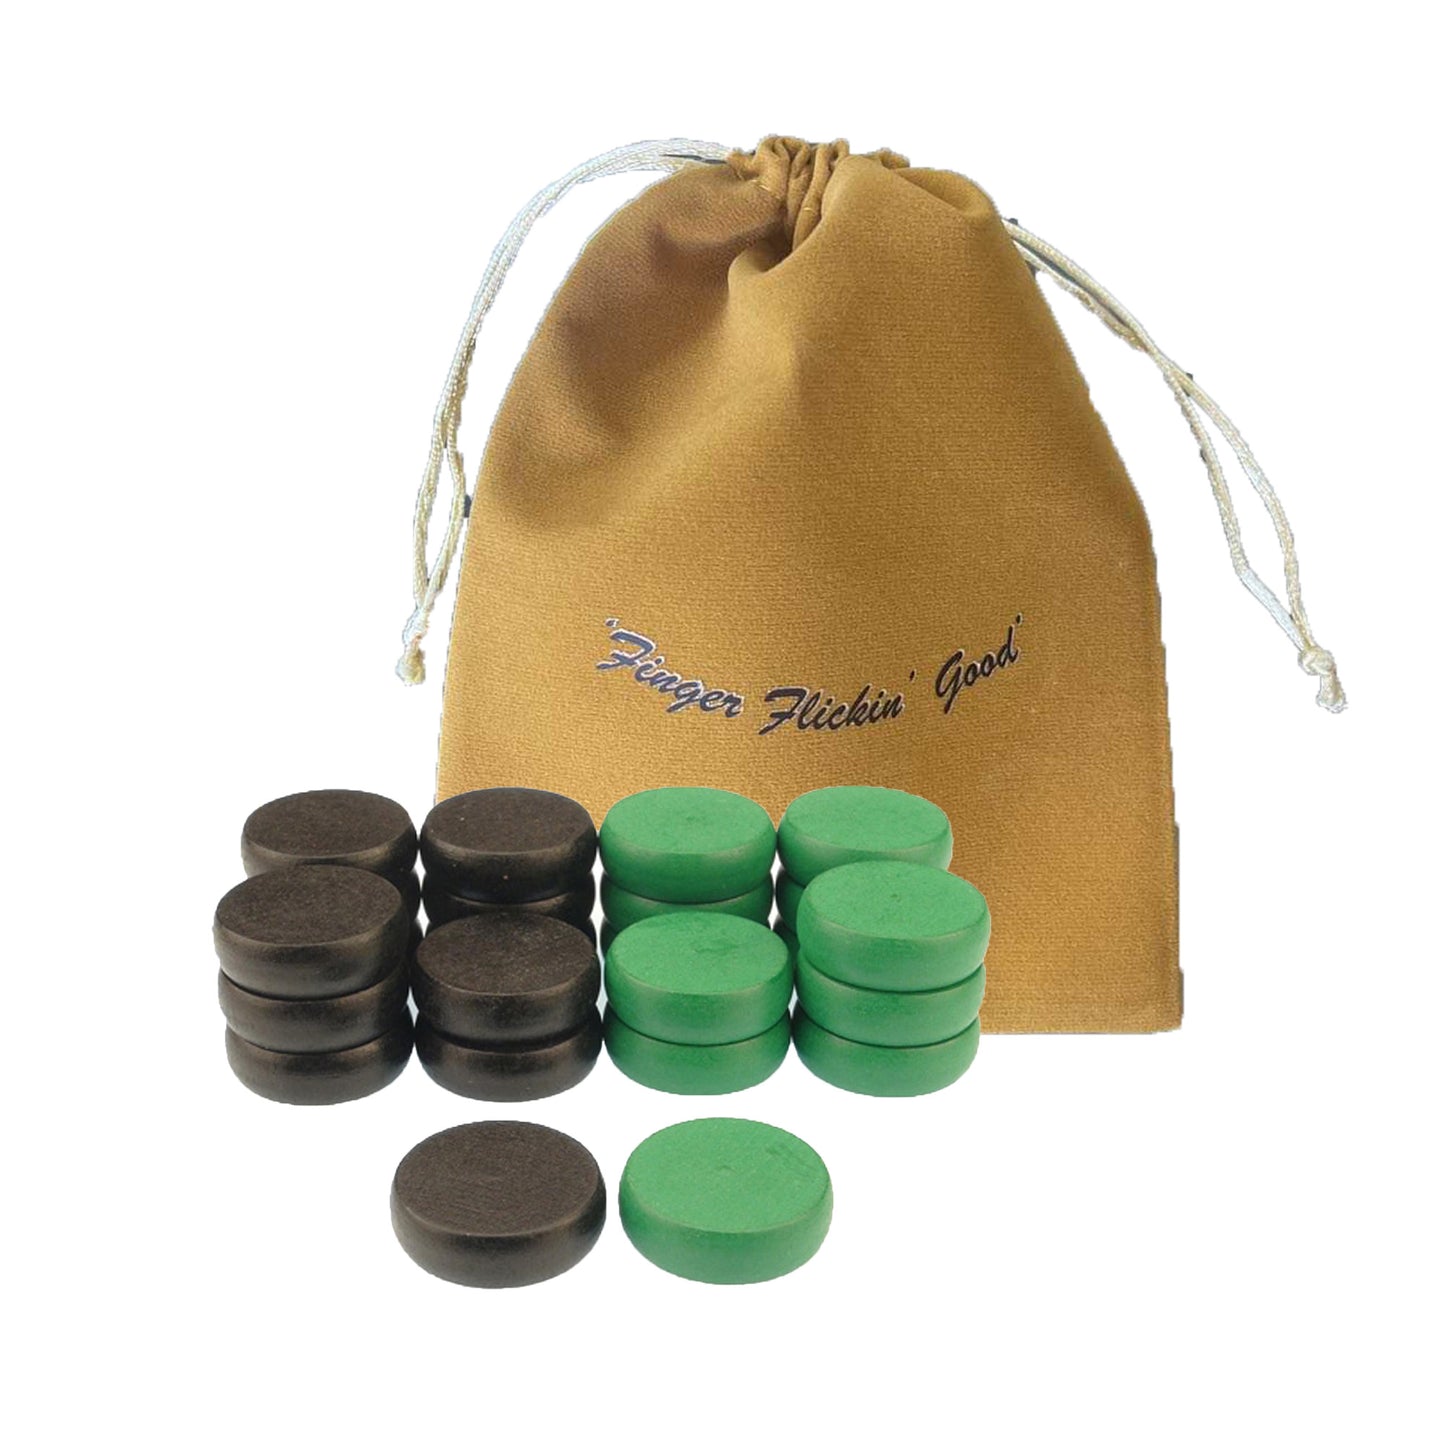 Crokinole Tournament Discs - 13 Black and 13 Green - Size 1-1/4" - 24 Needed + 2 Spare Discs - Bag Included - Carrom Alternative